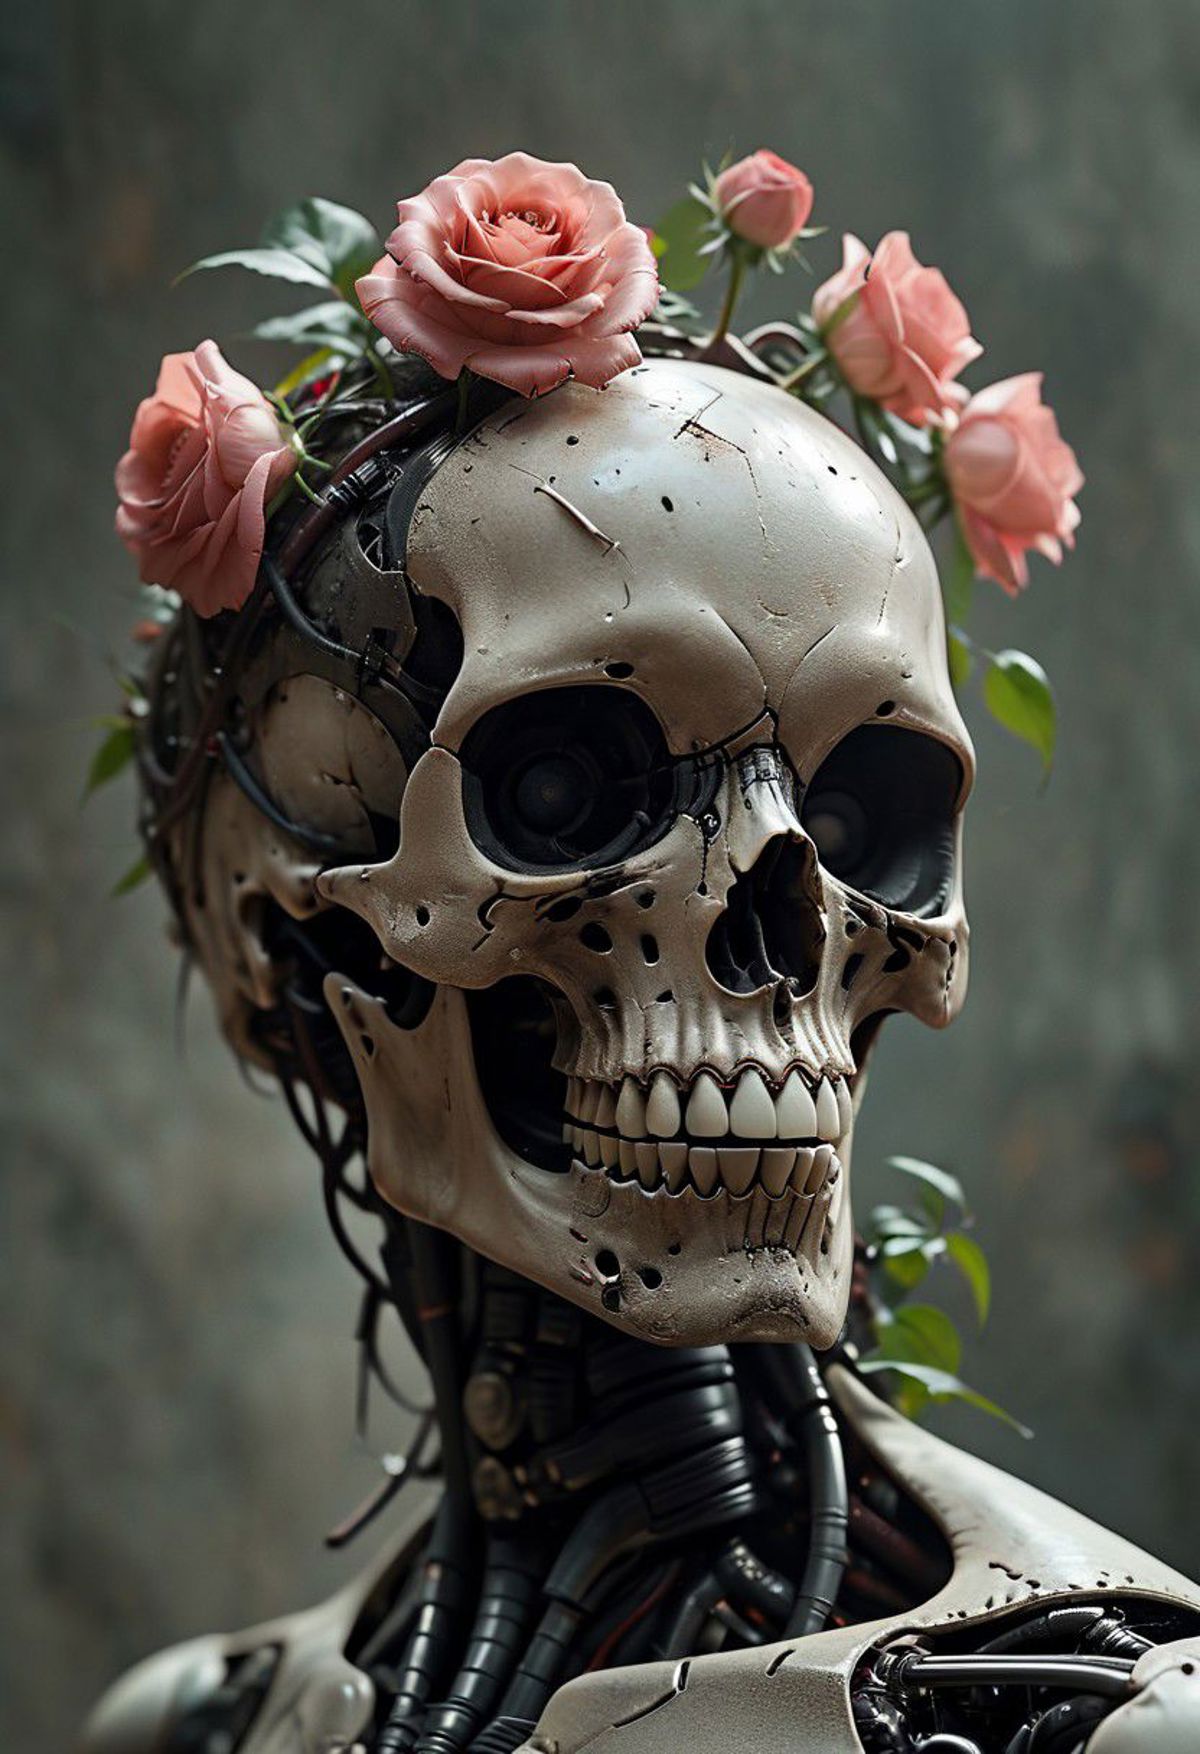 A robot head with a skull face and roses as a headband.